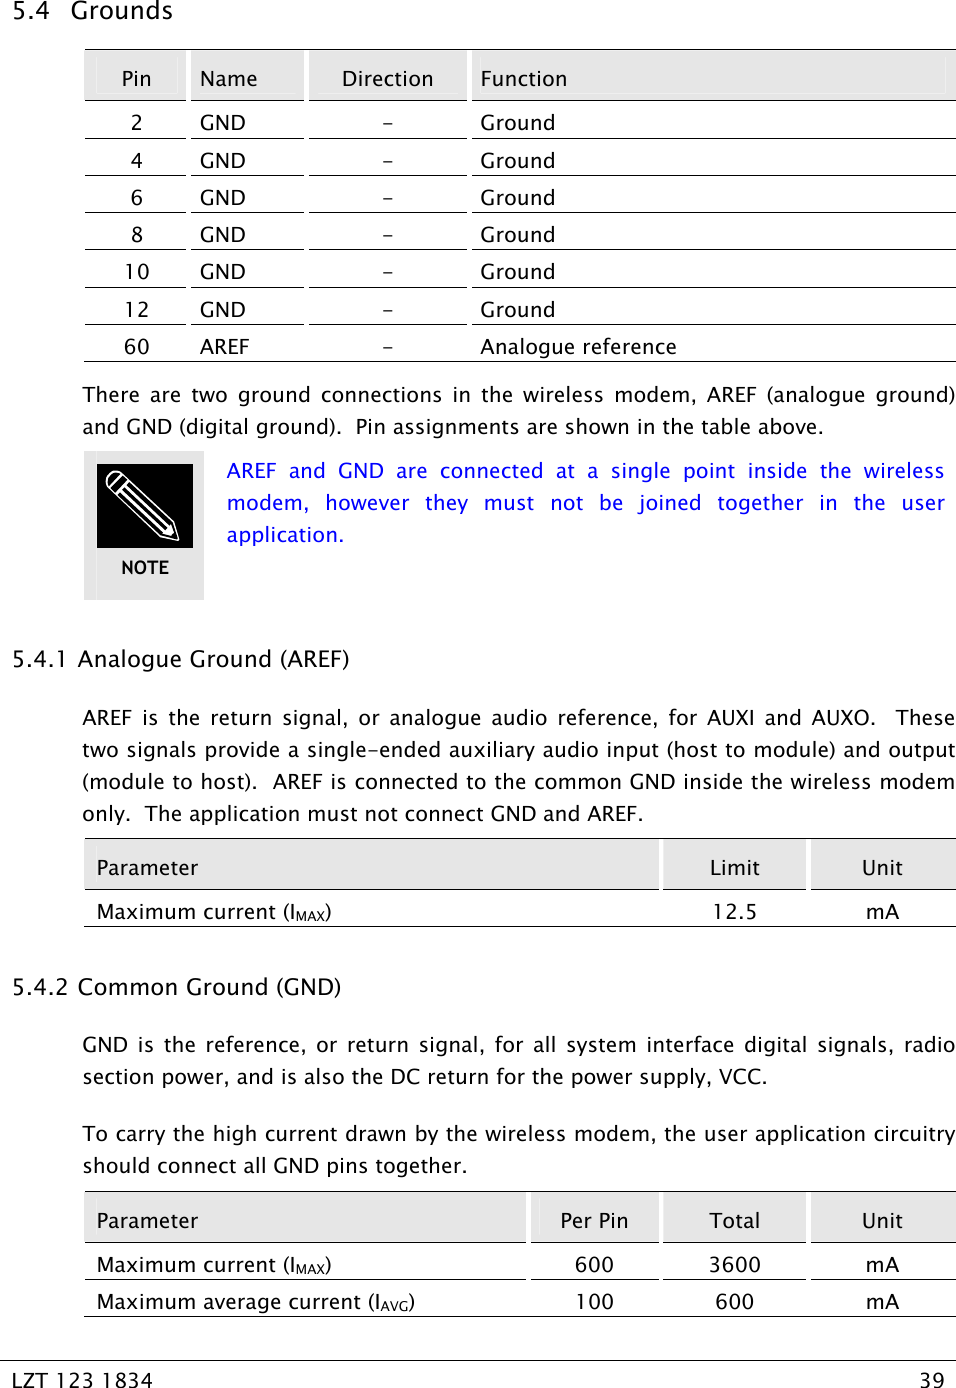   LZT 123 1834  39   5.4 Grounds Pin  Name  Direction  Function 2 GND  -  Ground 4 GND  -  Ground 6 GND  -  Ground 8 GND  -  Ground 10 GND  -  Ground 12 GND  -  Ground 60 AREF  -  Analogue reference There are two ground connections in the wireless modem, AREF (analogue ground) and GND (digital ground).  Pin assignments are shown in the table above.  AREF and GND are connected at a single point inside the wireless modem, however they must not be joined together in the user application. 5.4.1  Analogue Ground (AREF) AREF is the return signal, or analogue audio reference, for AUXI and AUXO.  These two signals provide a single-ended auxiliary audio input (host to module) and output (module to host).  AREF is connected to the common GND inside the wireless modem only.  The application must not connect GND and AREF. Parameter  Limit  Unit Maximum current (IMAX) 12.5 mA 5.4.2  Common Ground (GND) GND is the reference, or return signal, for all system interface digital signals, radio section power, and is also the DC return for the power supply, VCC. To carry the high current drawn by the wireless modem, the user application circuitry should connect all GND pins together. Parameter  Per Pin  Total  Unit Maximum current (IMAX) 600 3600 mA Maximum average current (IAVG) 100 600 mA NOTE